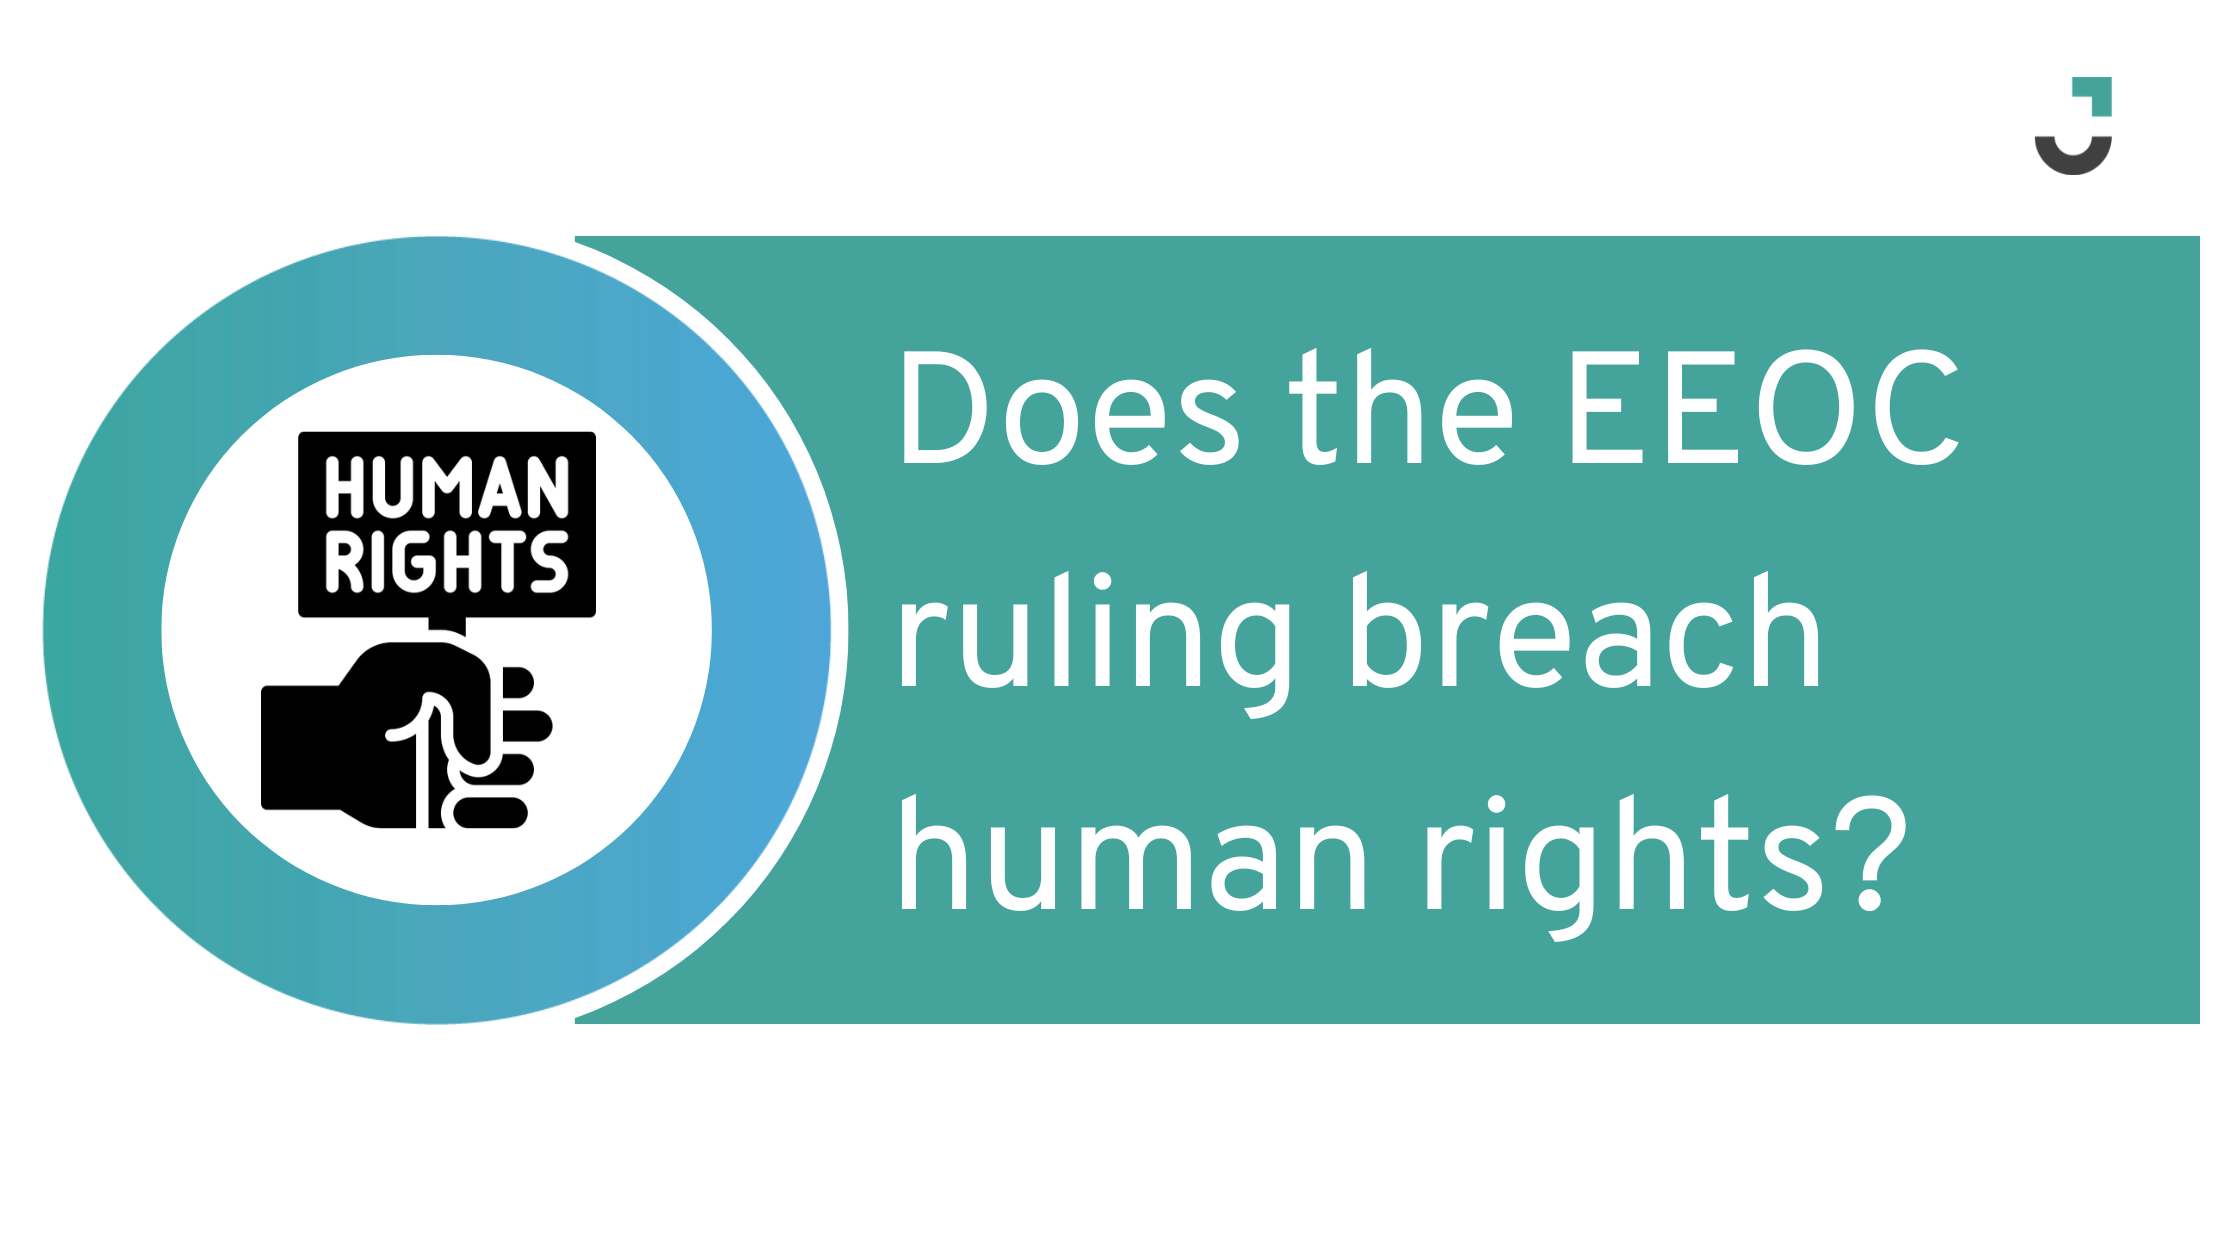 Does the EEOC ruling breach human rights?